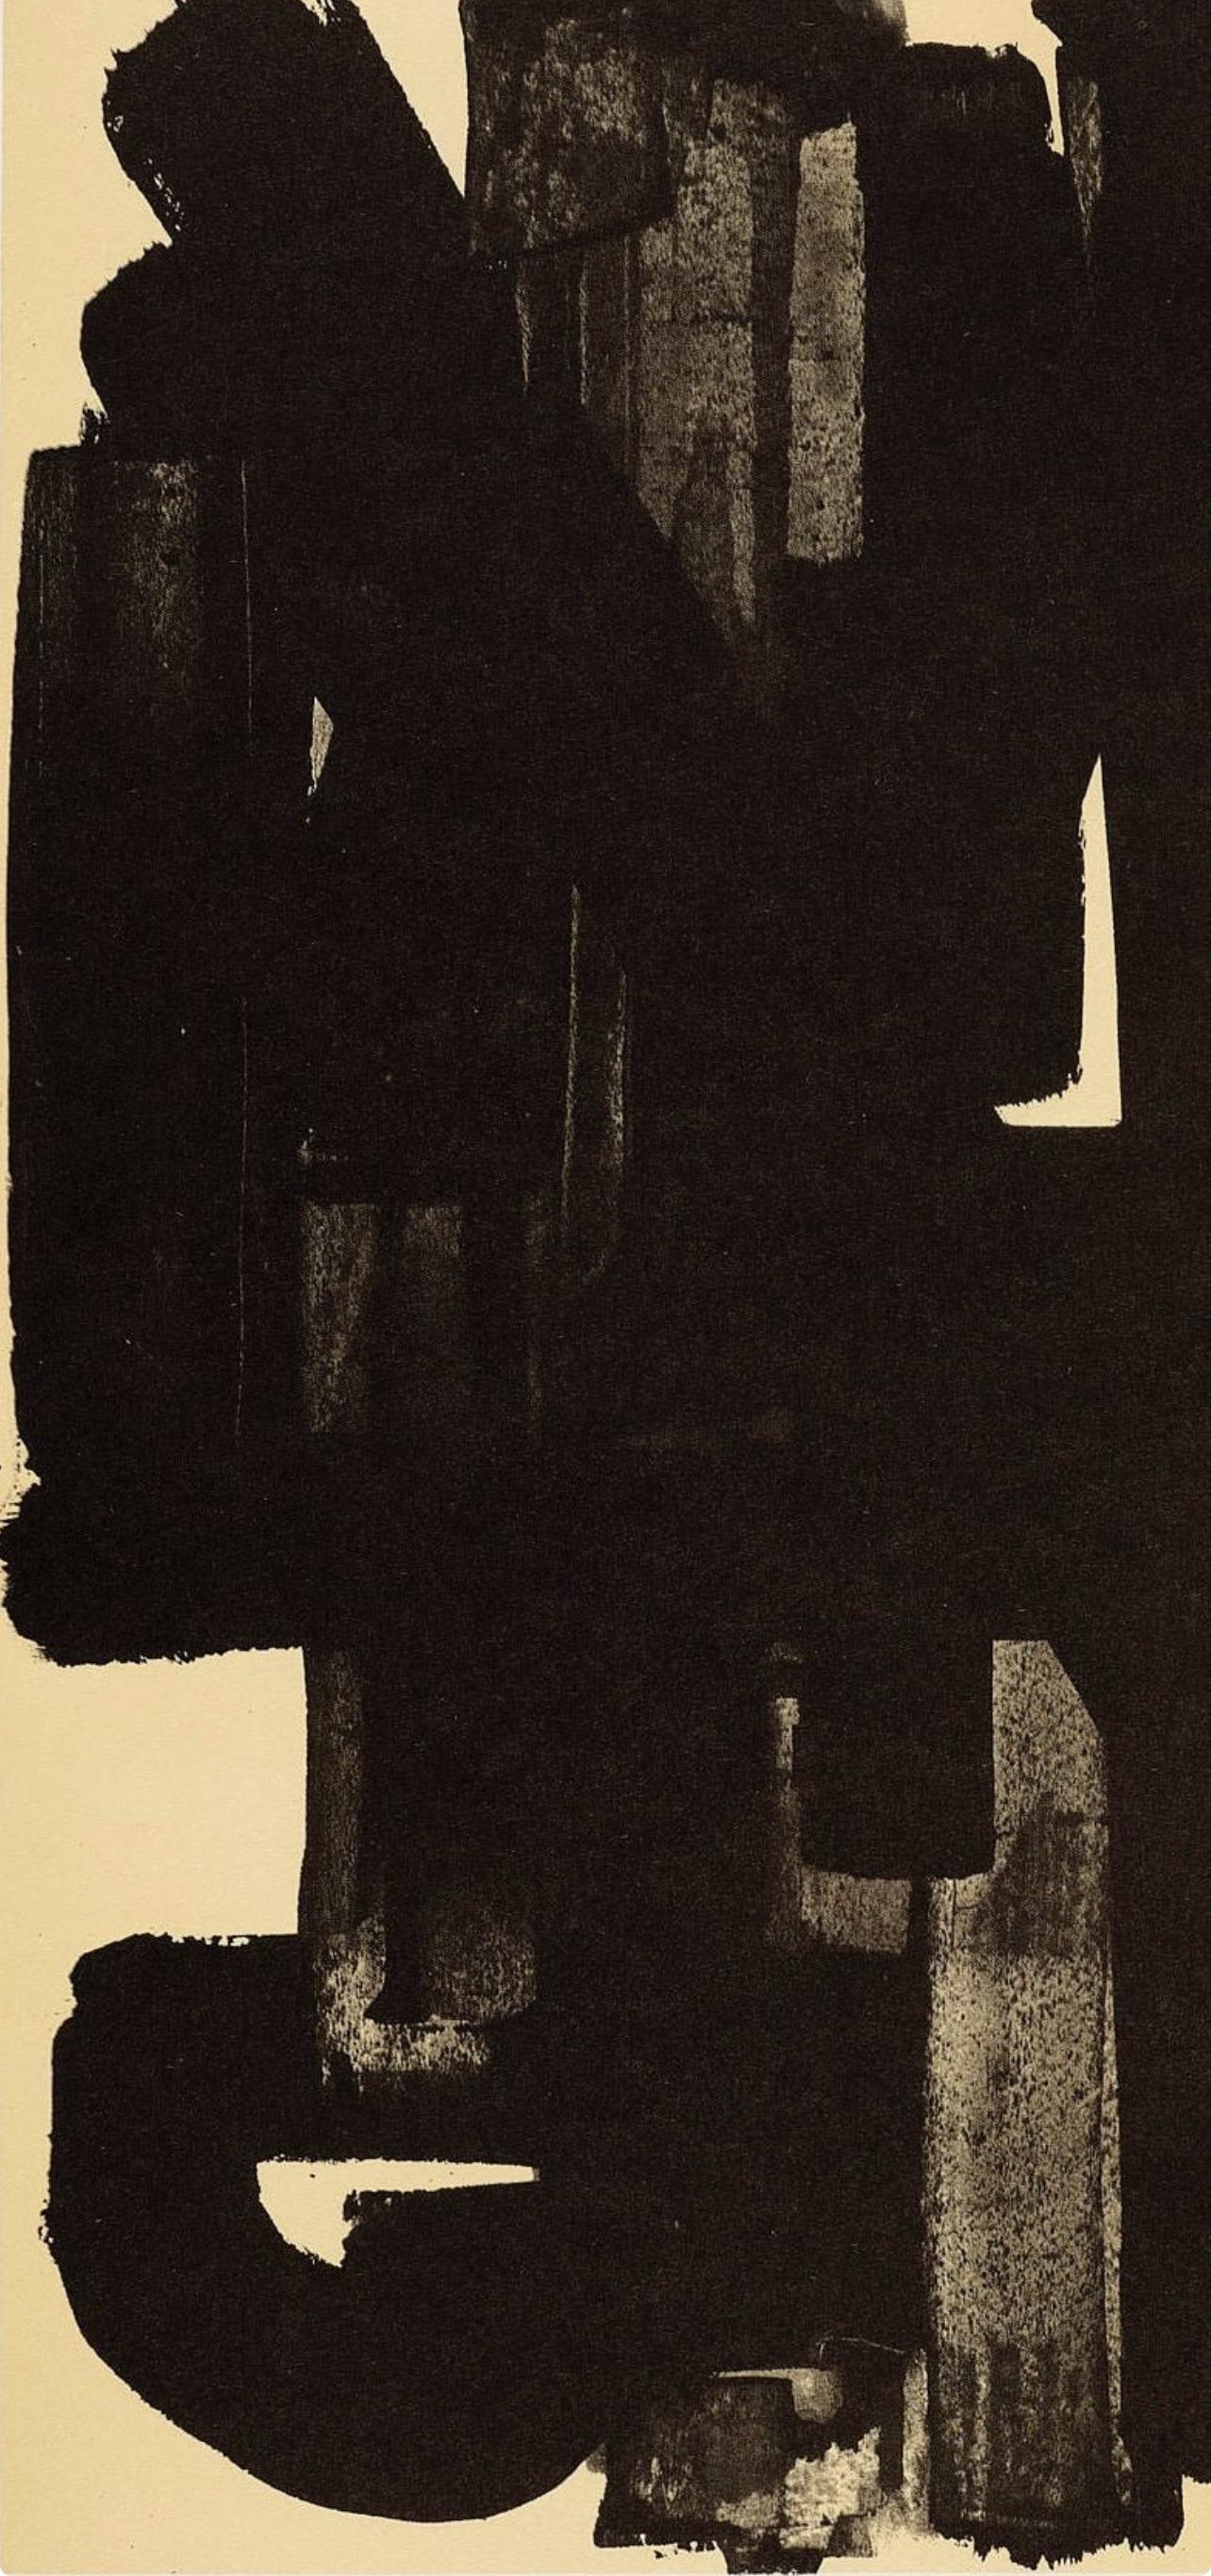 Lithograph on wove paper. Unsigned and unnumbered, as issued. Good Condition; never framed or matted. Notes: From the folio, Pierre Soulages: Peintres d'aujourd'hui, 1962. Published by Fernand Hazan, Paris; lithographic plates produced by Clichés